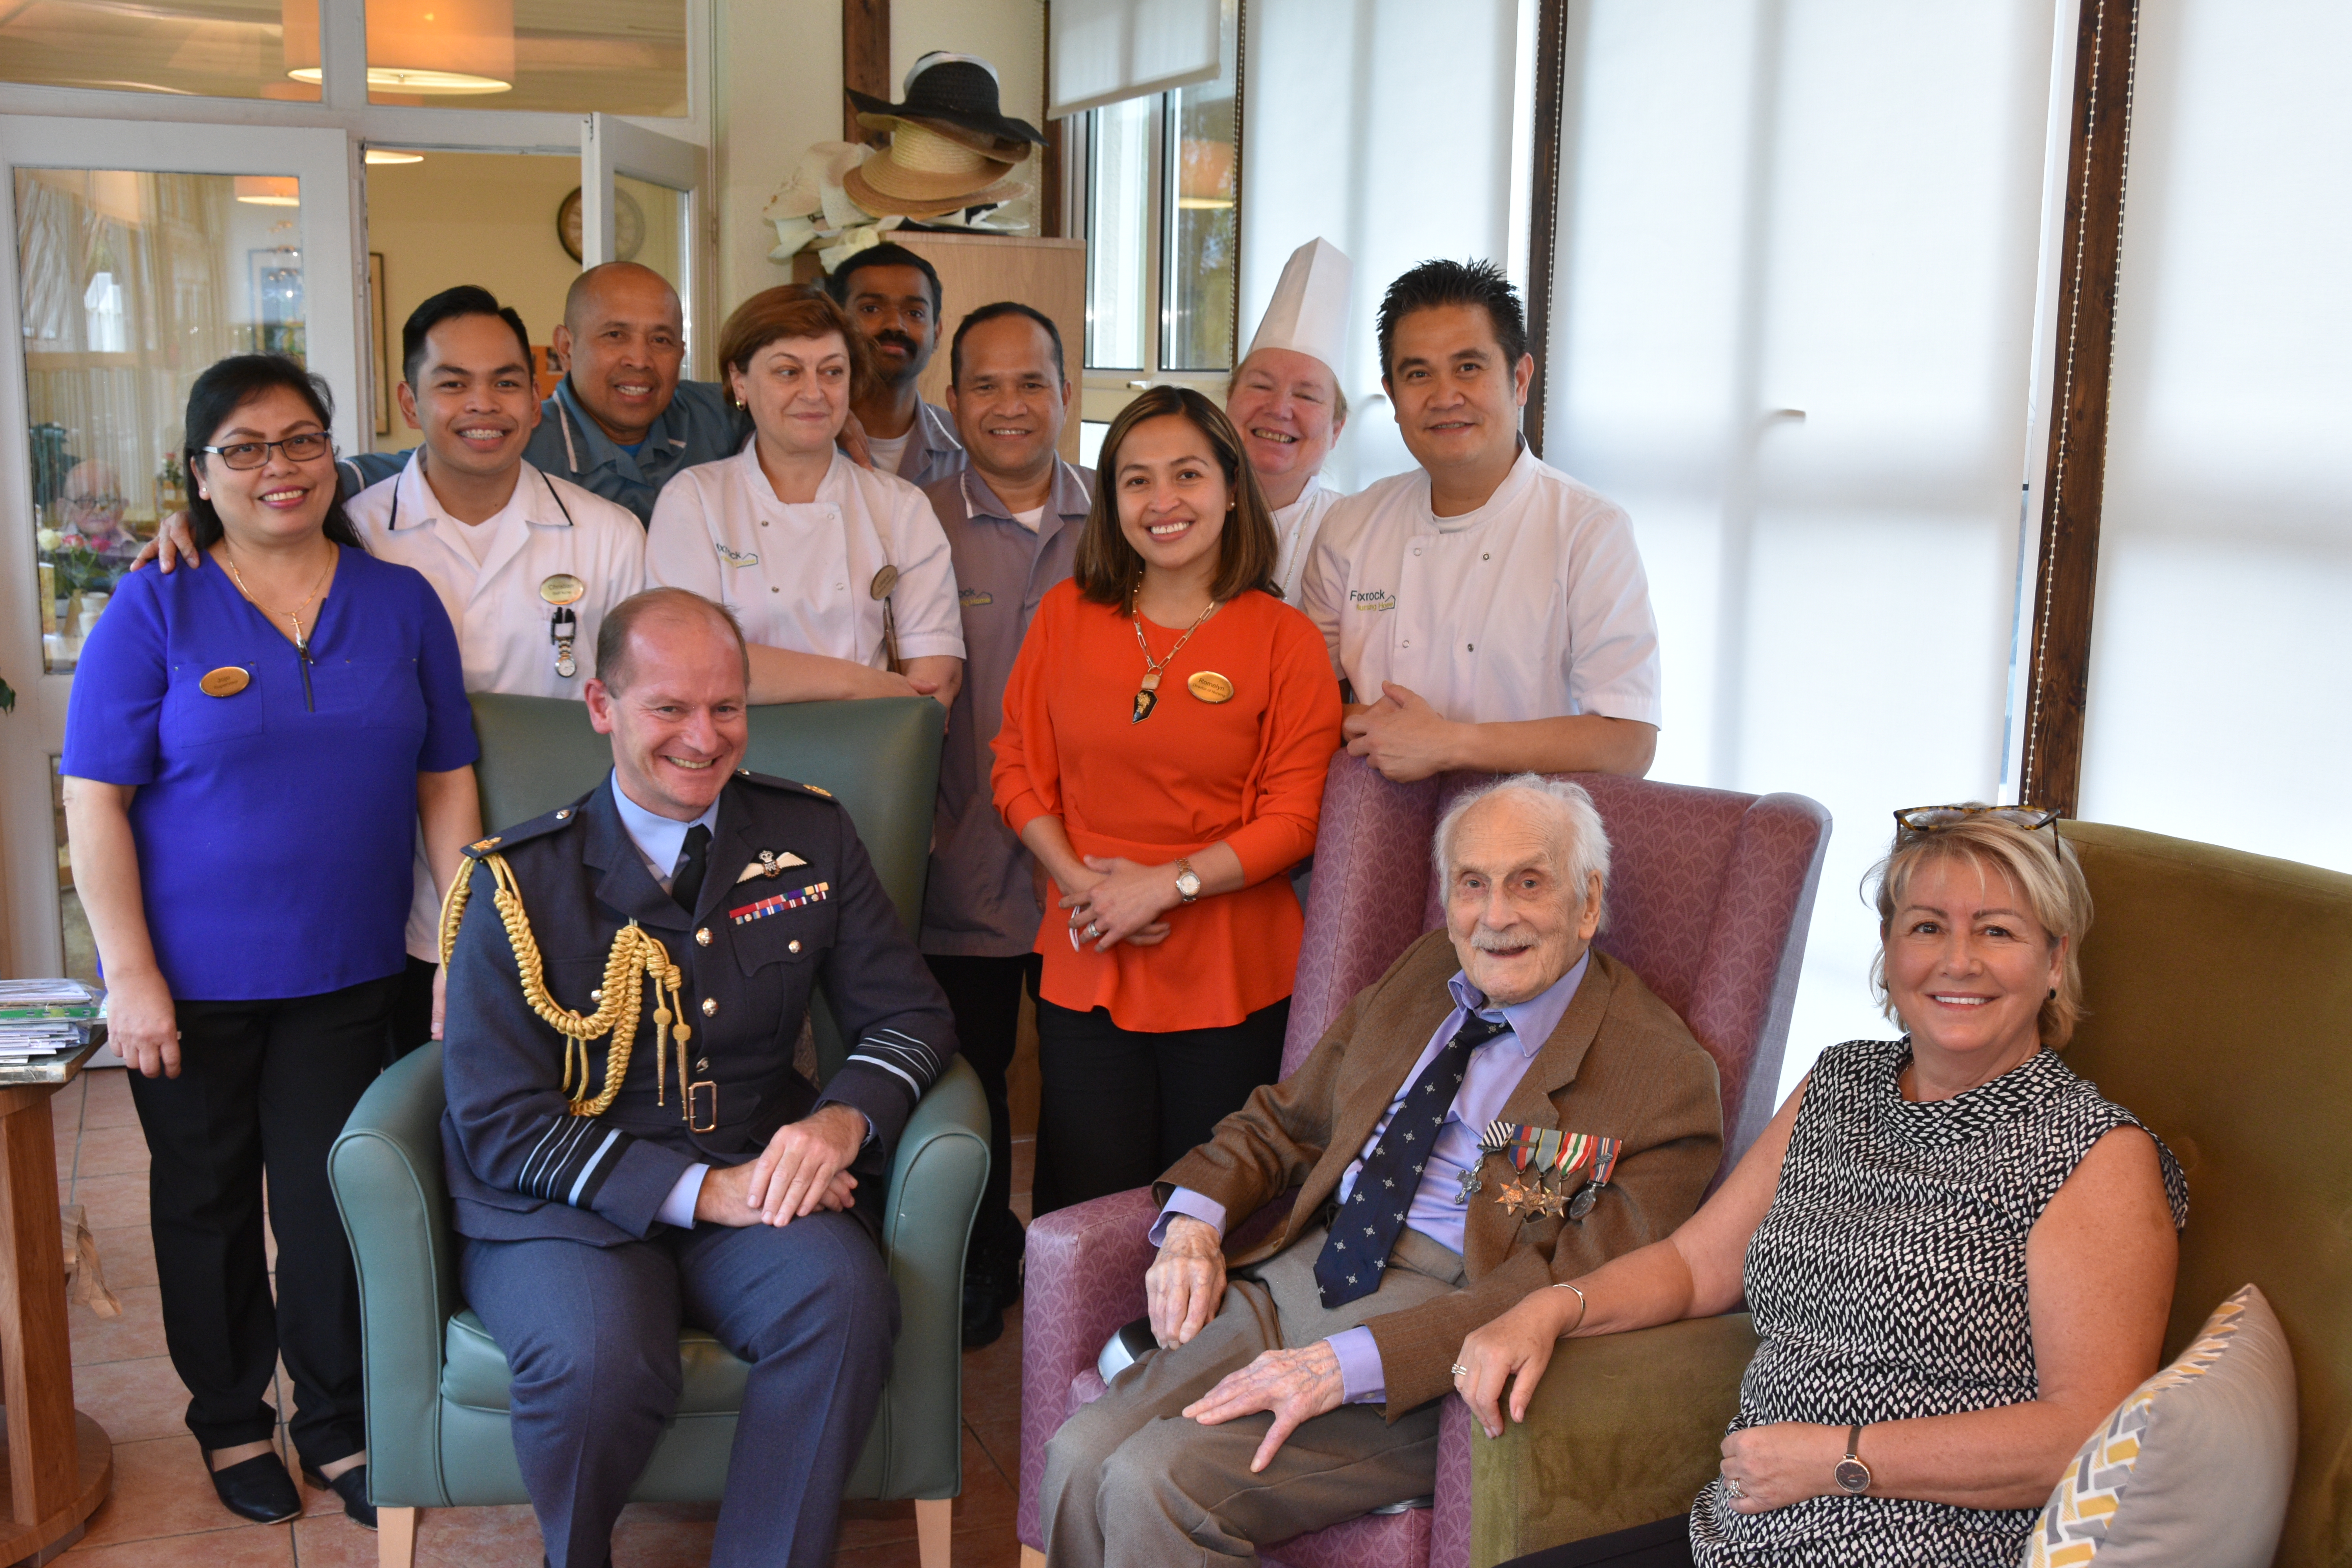 Group Captain (retired) John ‘Paddy’ Hemingway and Air Chief Marshal Sir Mike Wigston with Care Home staff.